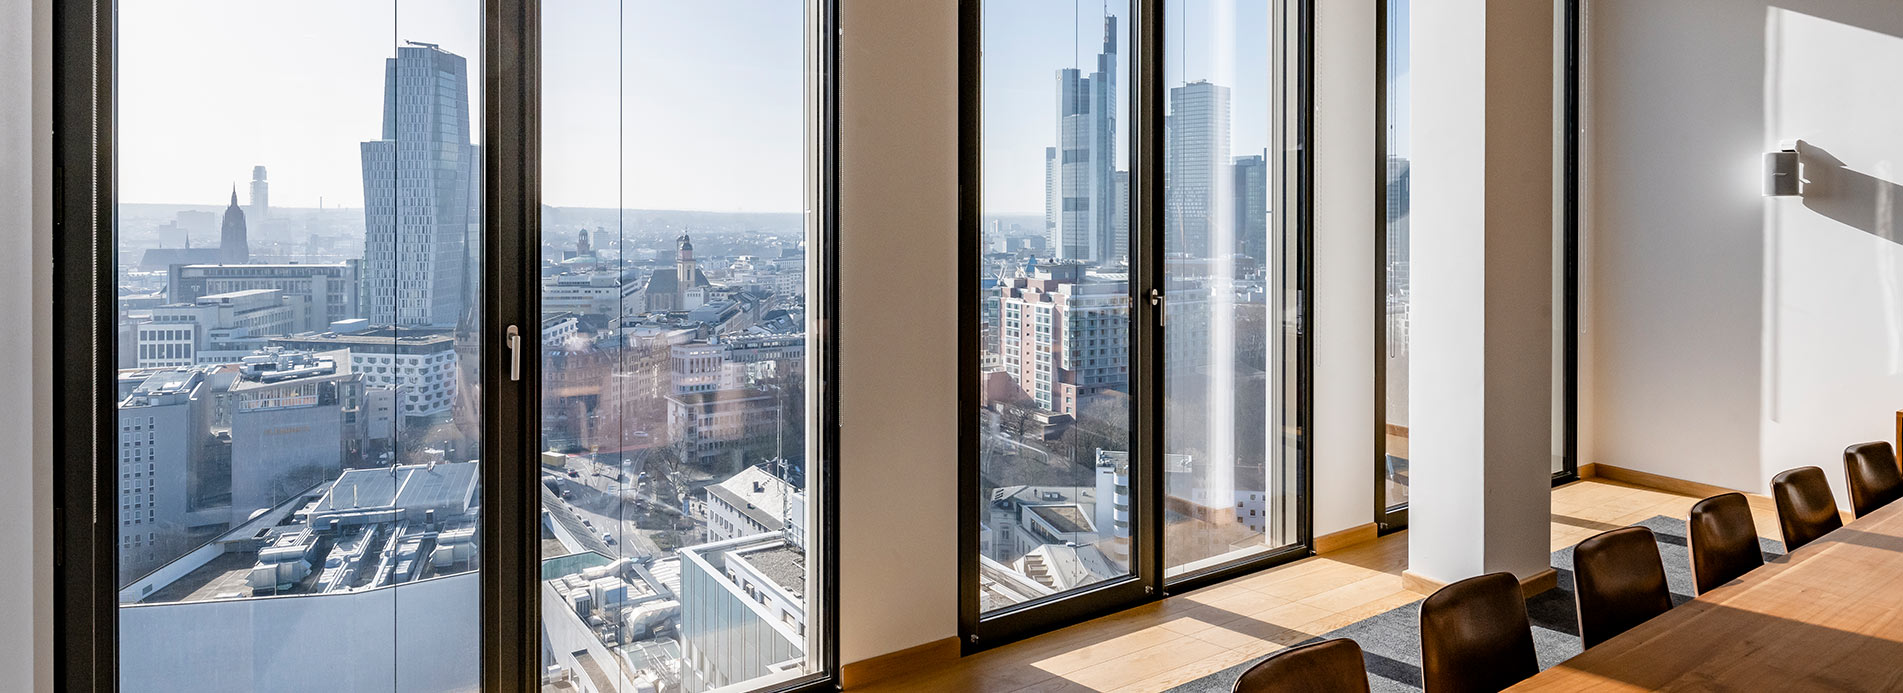 Conference room of VICTORIAPARTNERS with view of Frankfurt am Main.